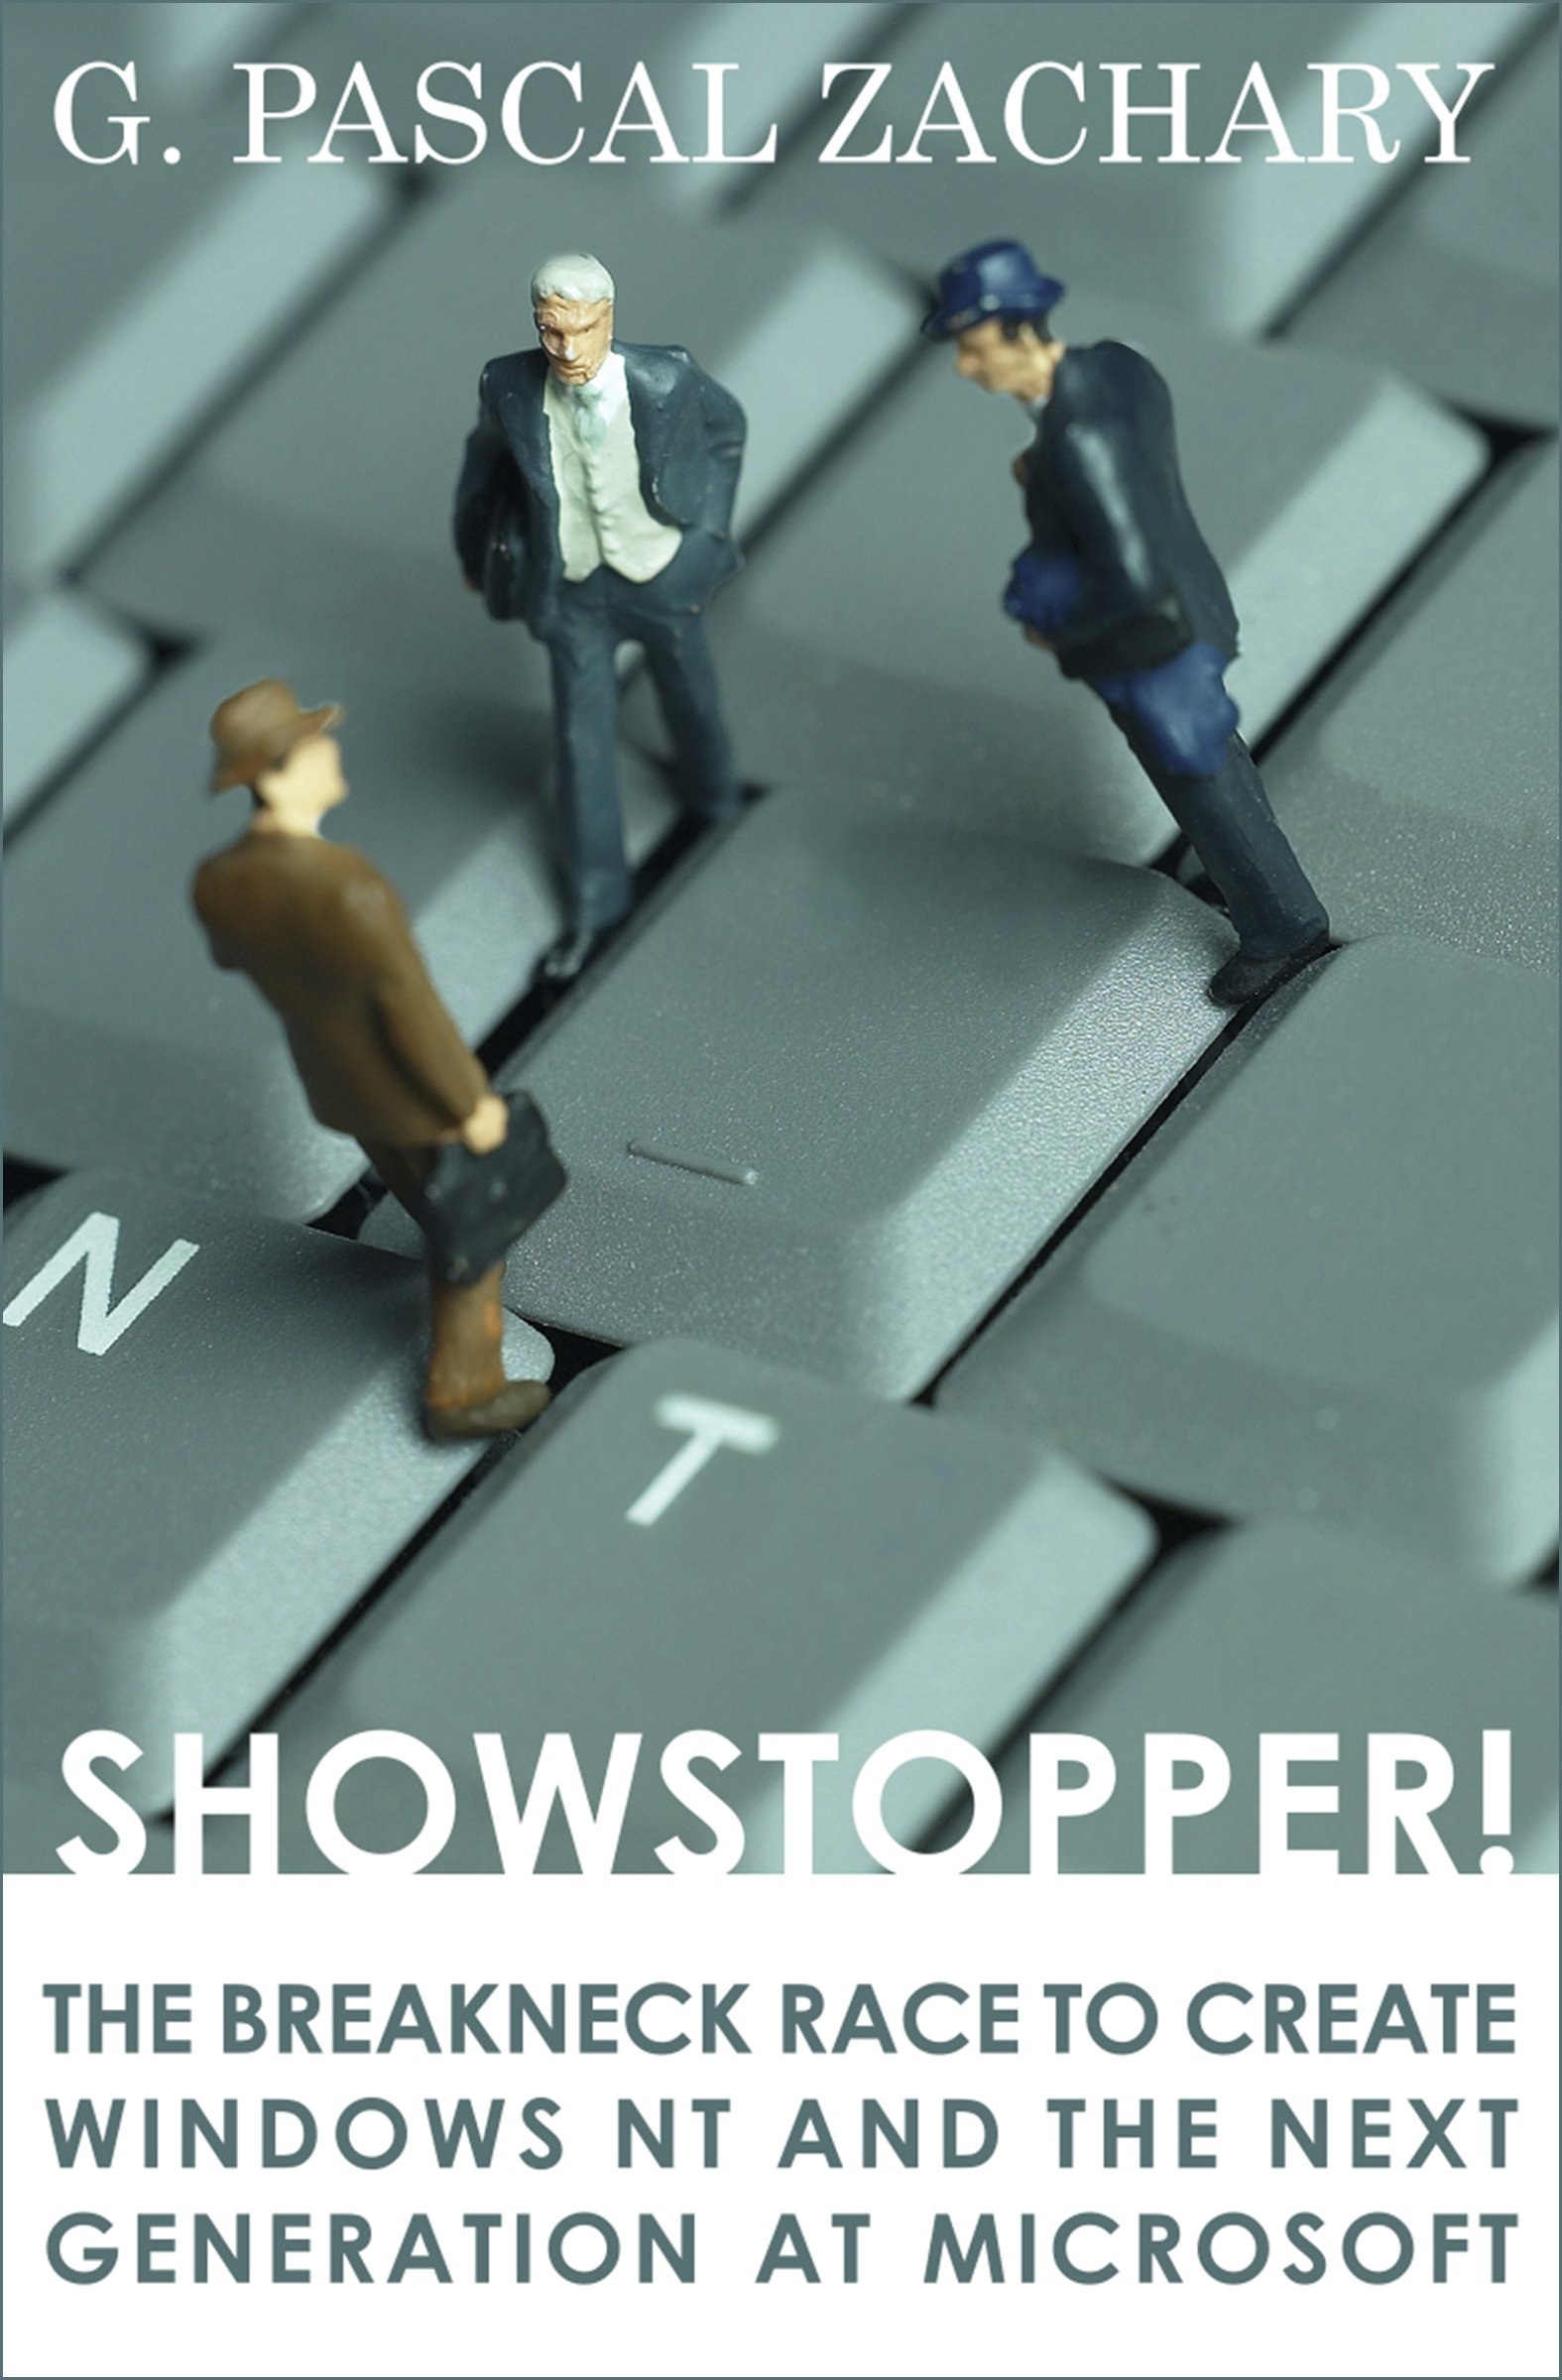 Showstopper! the Breakneck Race to Create Windows NT and the Next Generation at Microsoft